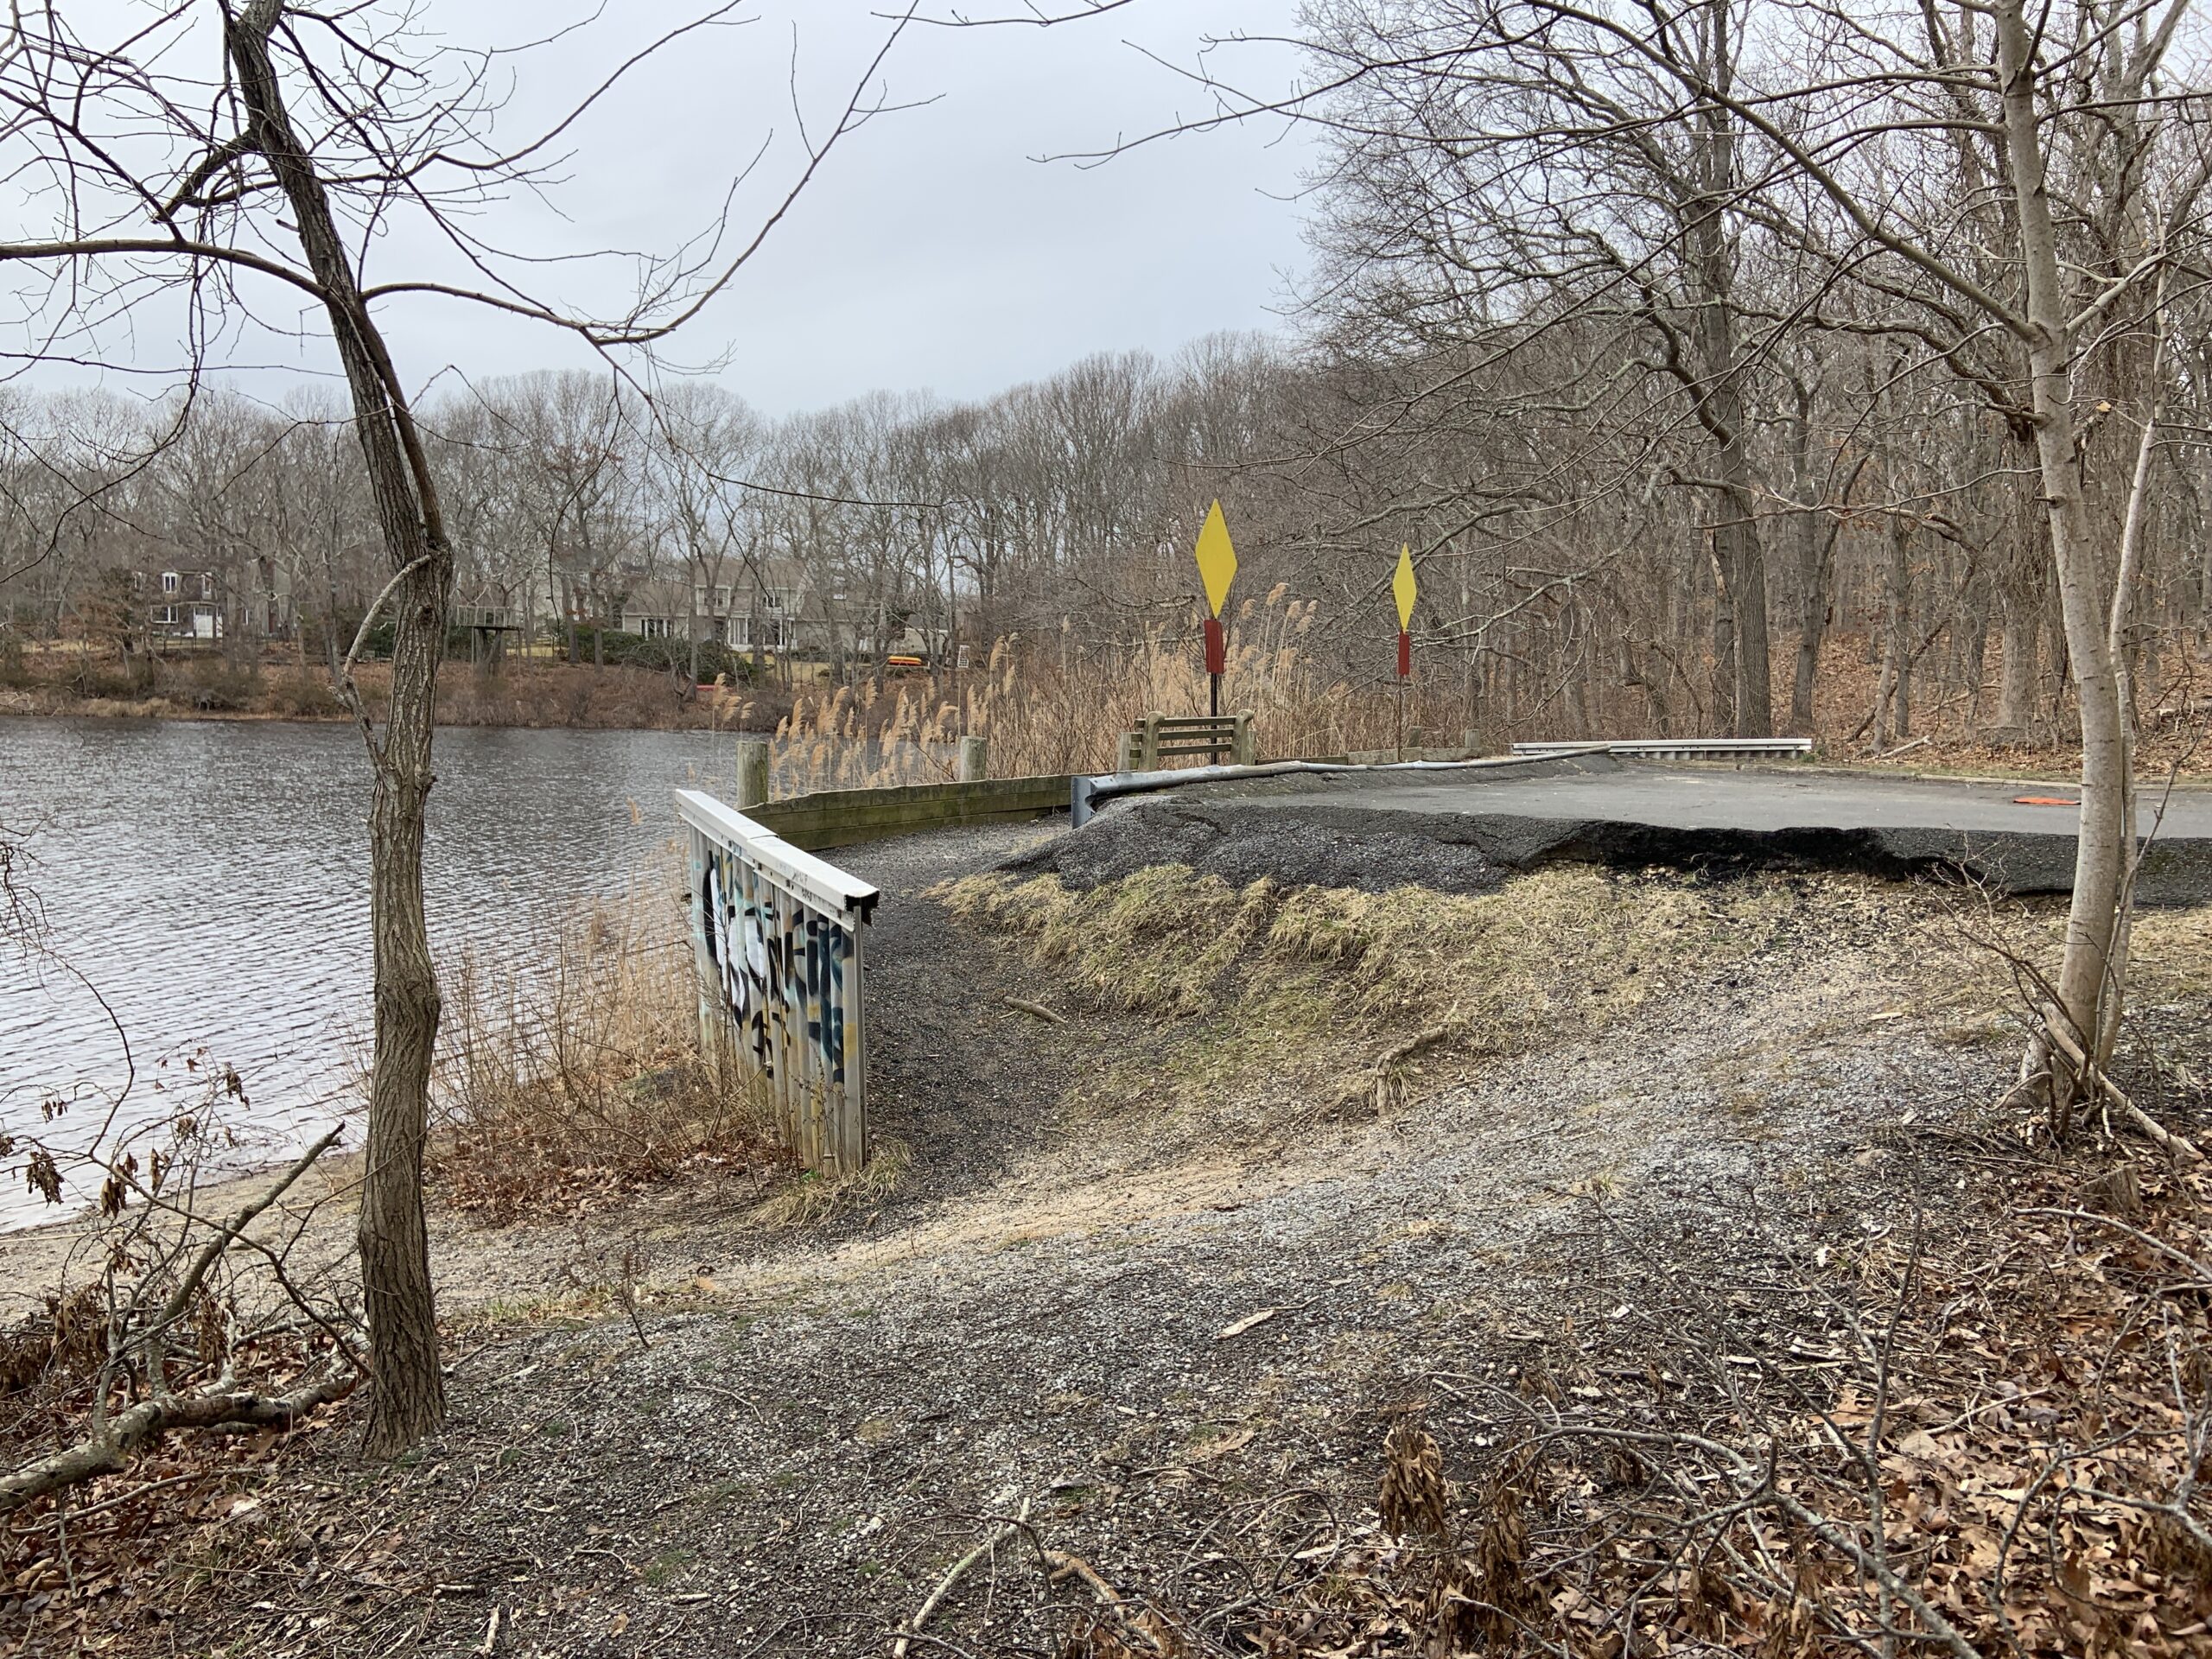 The decaying bulkhead at the foot of Middle Line Highway will be replaced with rain gardens and a bioswale in a project being coordinated by Southampton Town and the Village of Sag Harbor. STEPHEN J. KOTZ